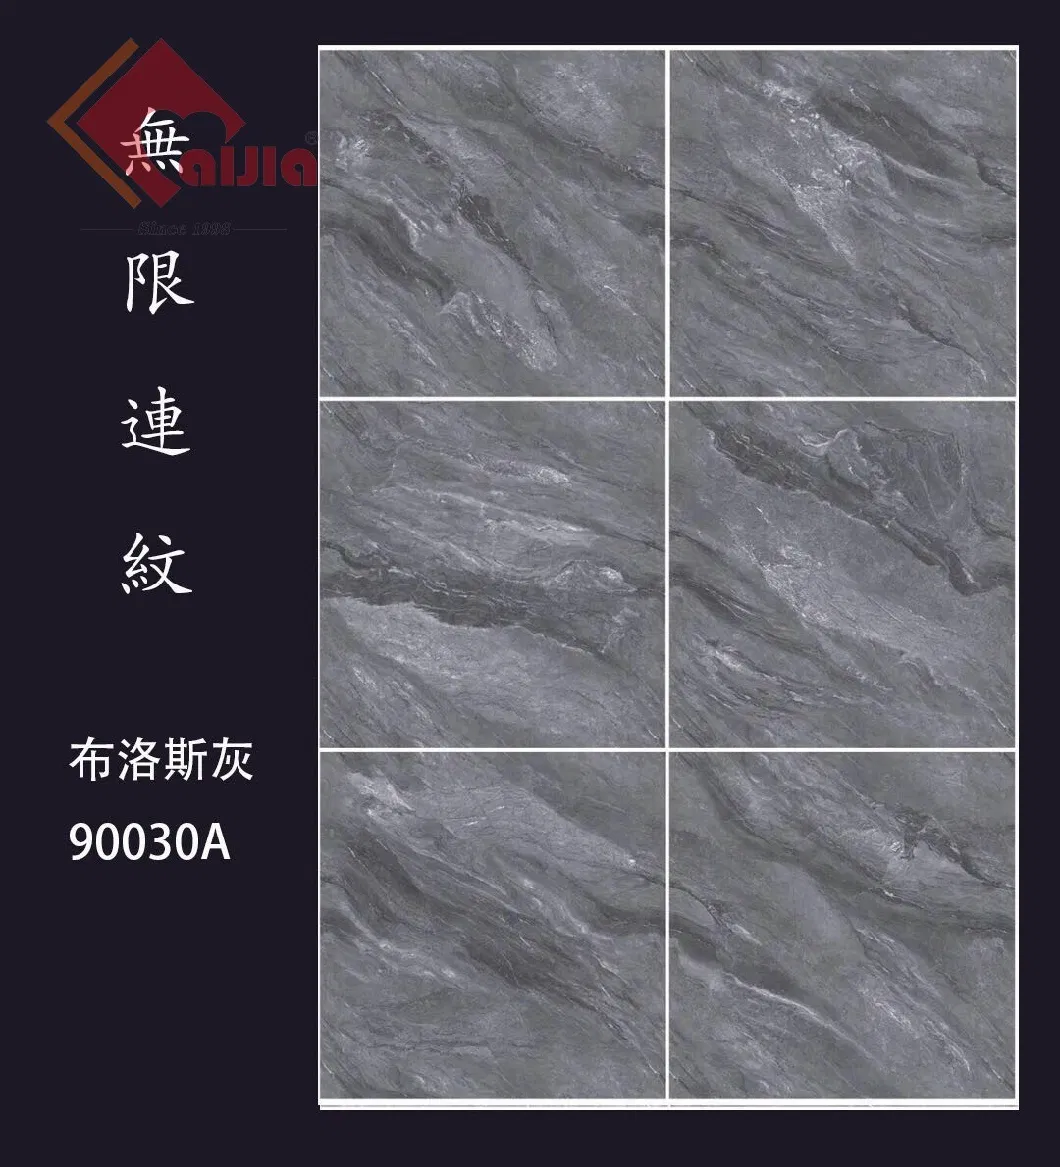 Polished Finish Size 900*900mm Porcelain Copy Marble Tile Good Building Material Hot Sell in Australia Market High Quality Wall and Floor Tile